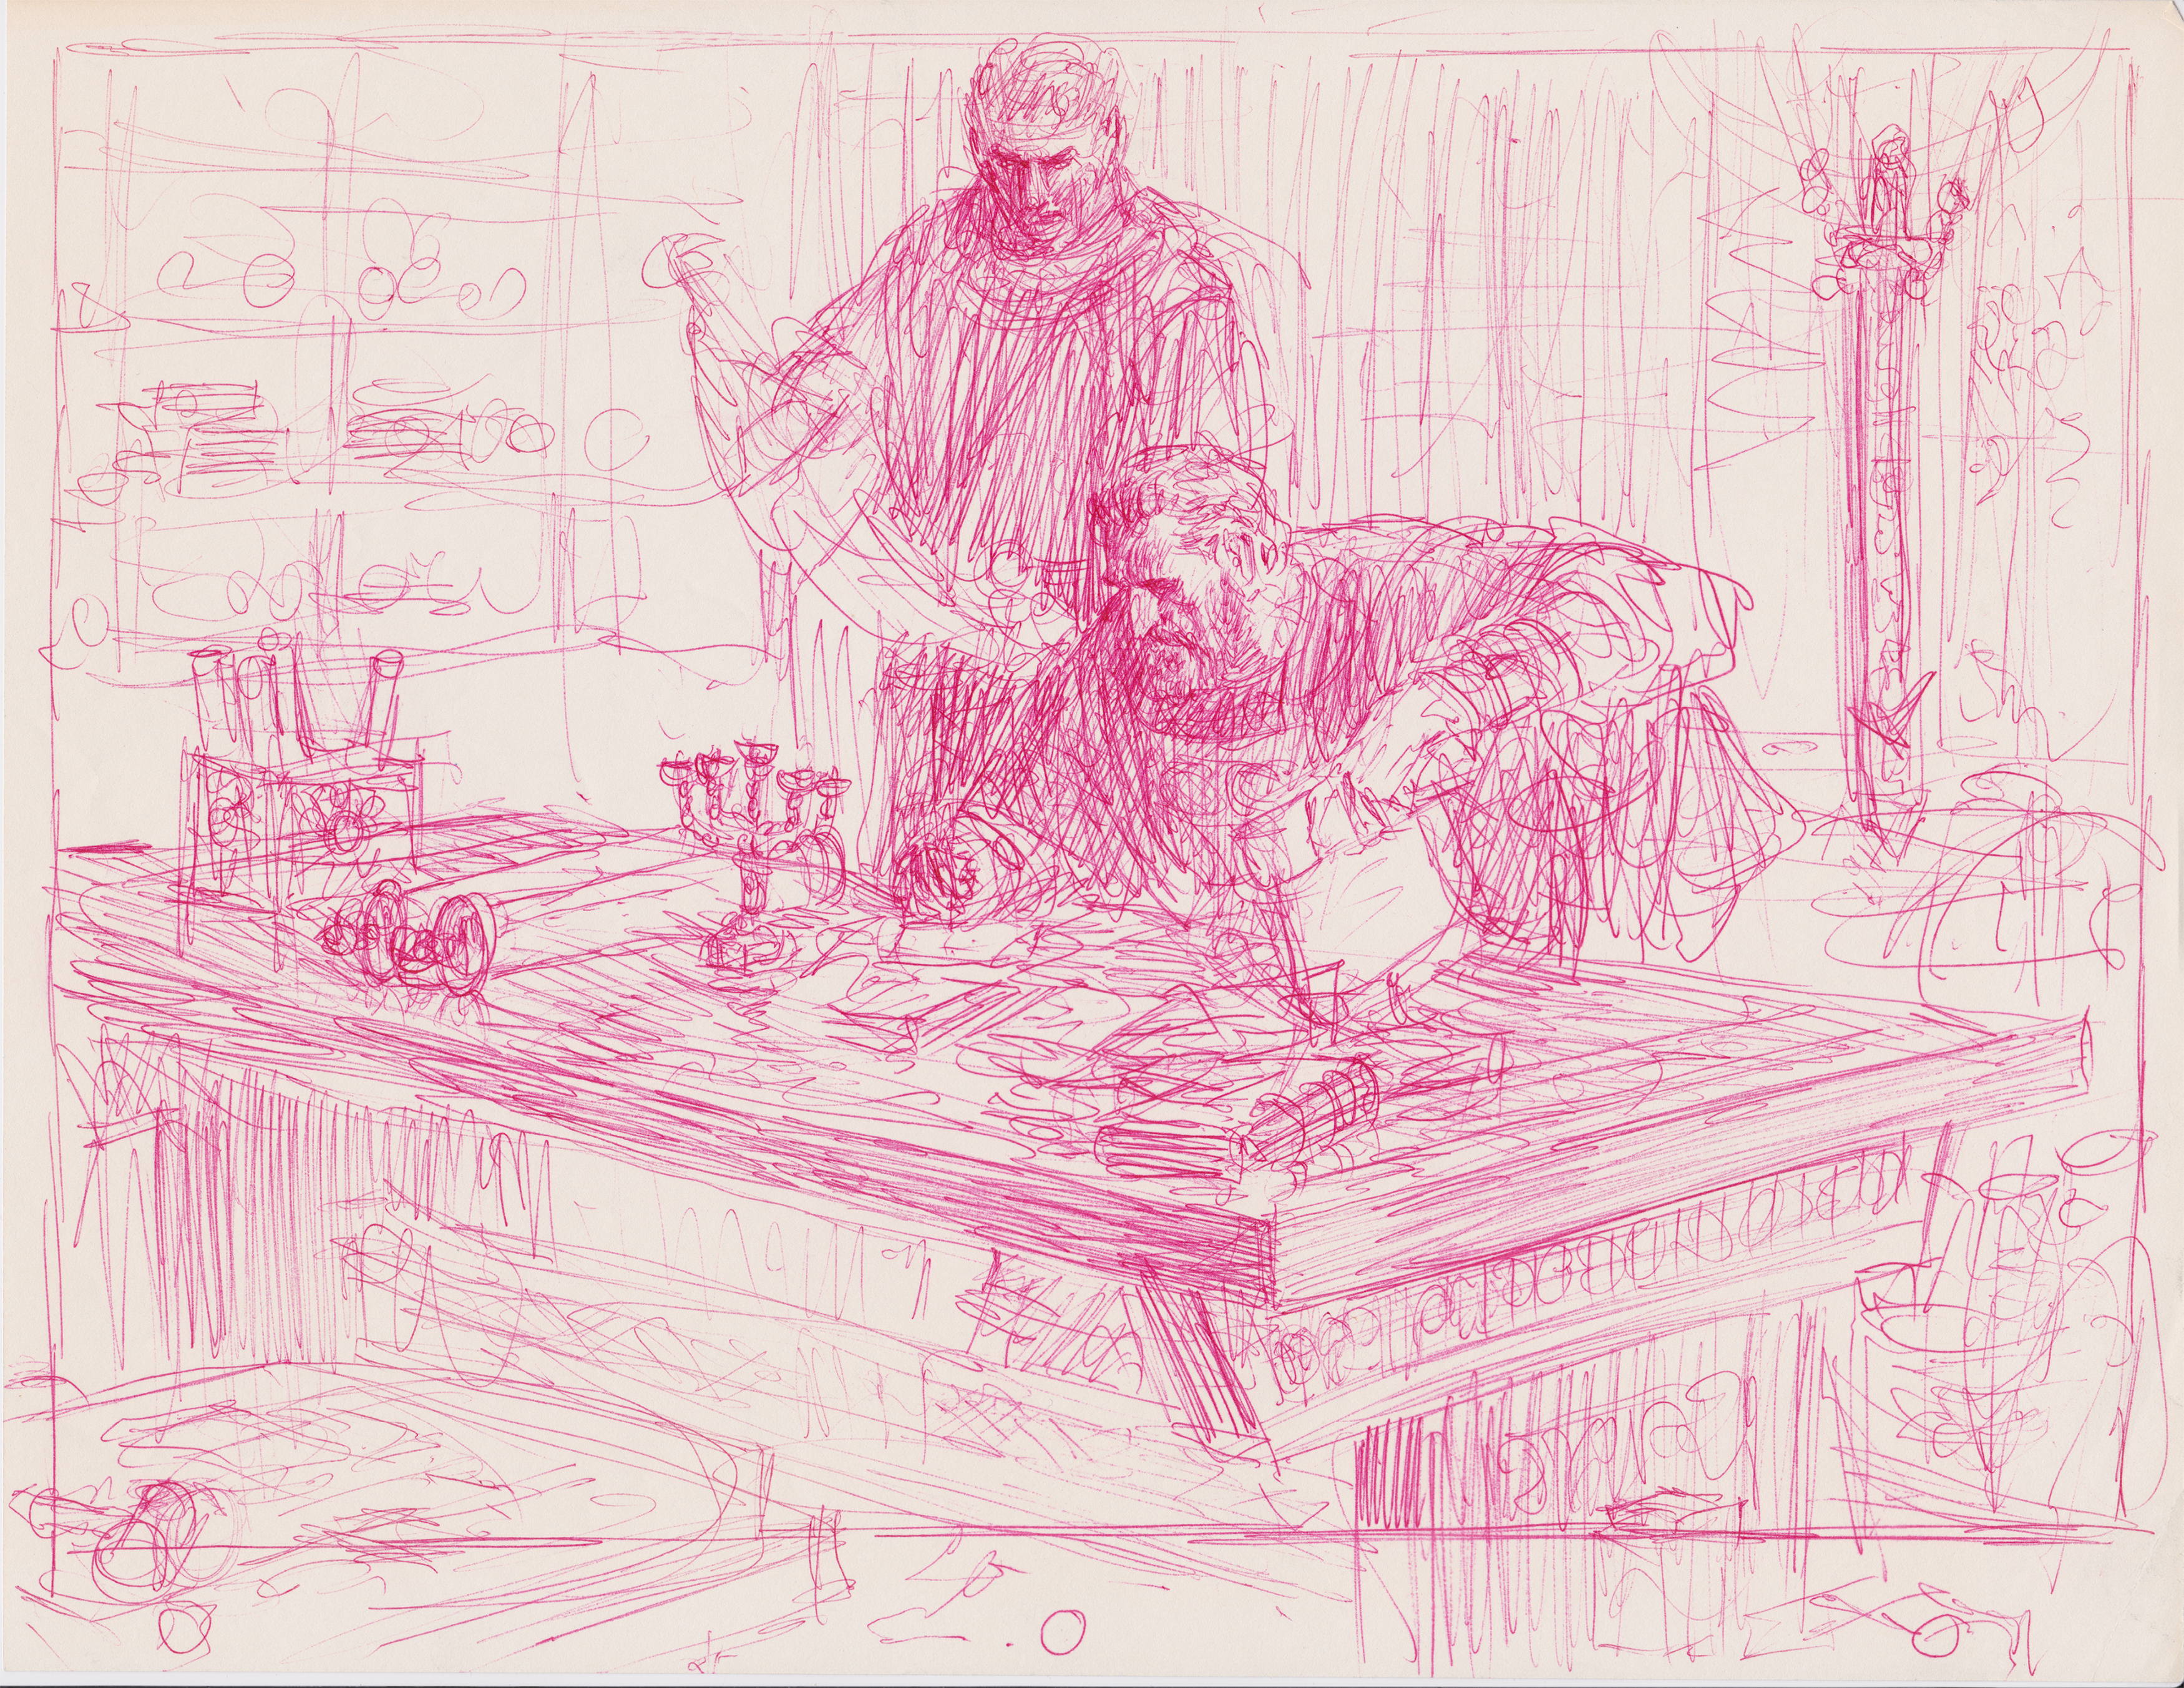 Sketch of “Mormon and Moroni Compiling the Record”